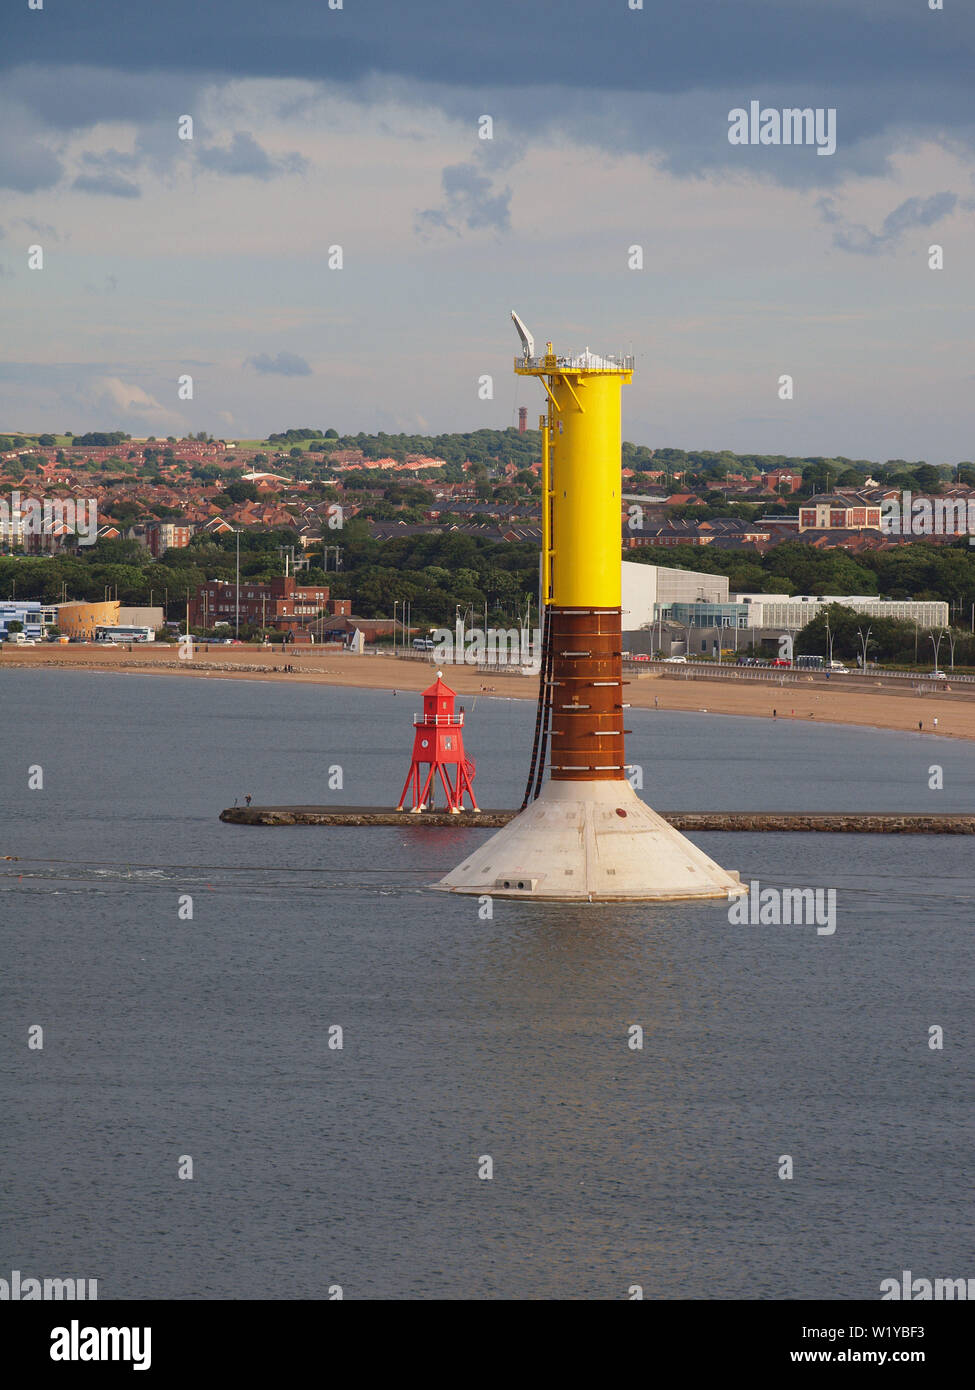 Offshore subsea steel wind turbine foundation jacket platforms for wind  energy production been towed into the north sea upon the river Tyne Stock  Photo - Alamy